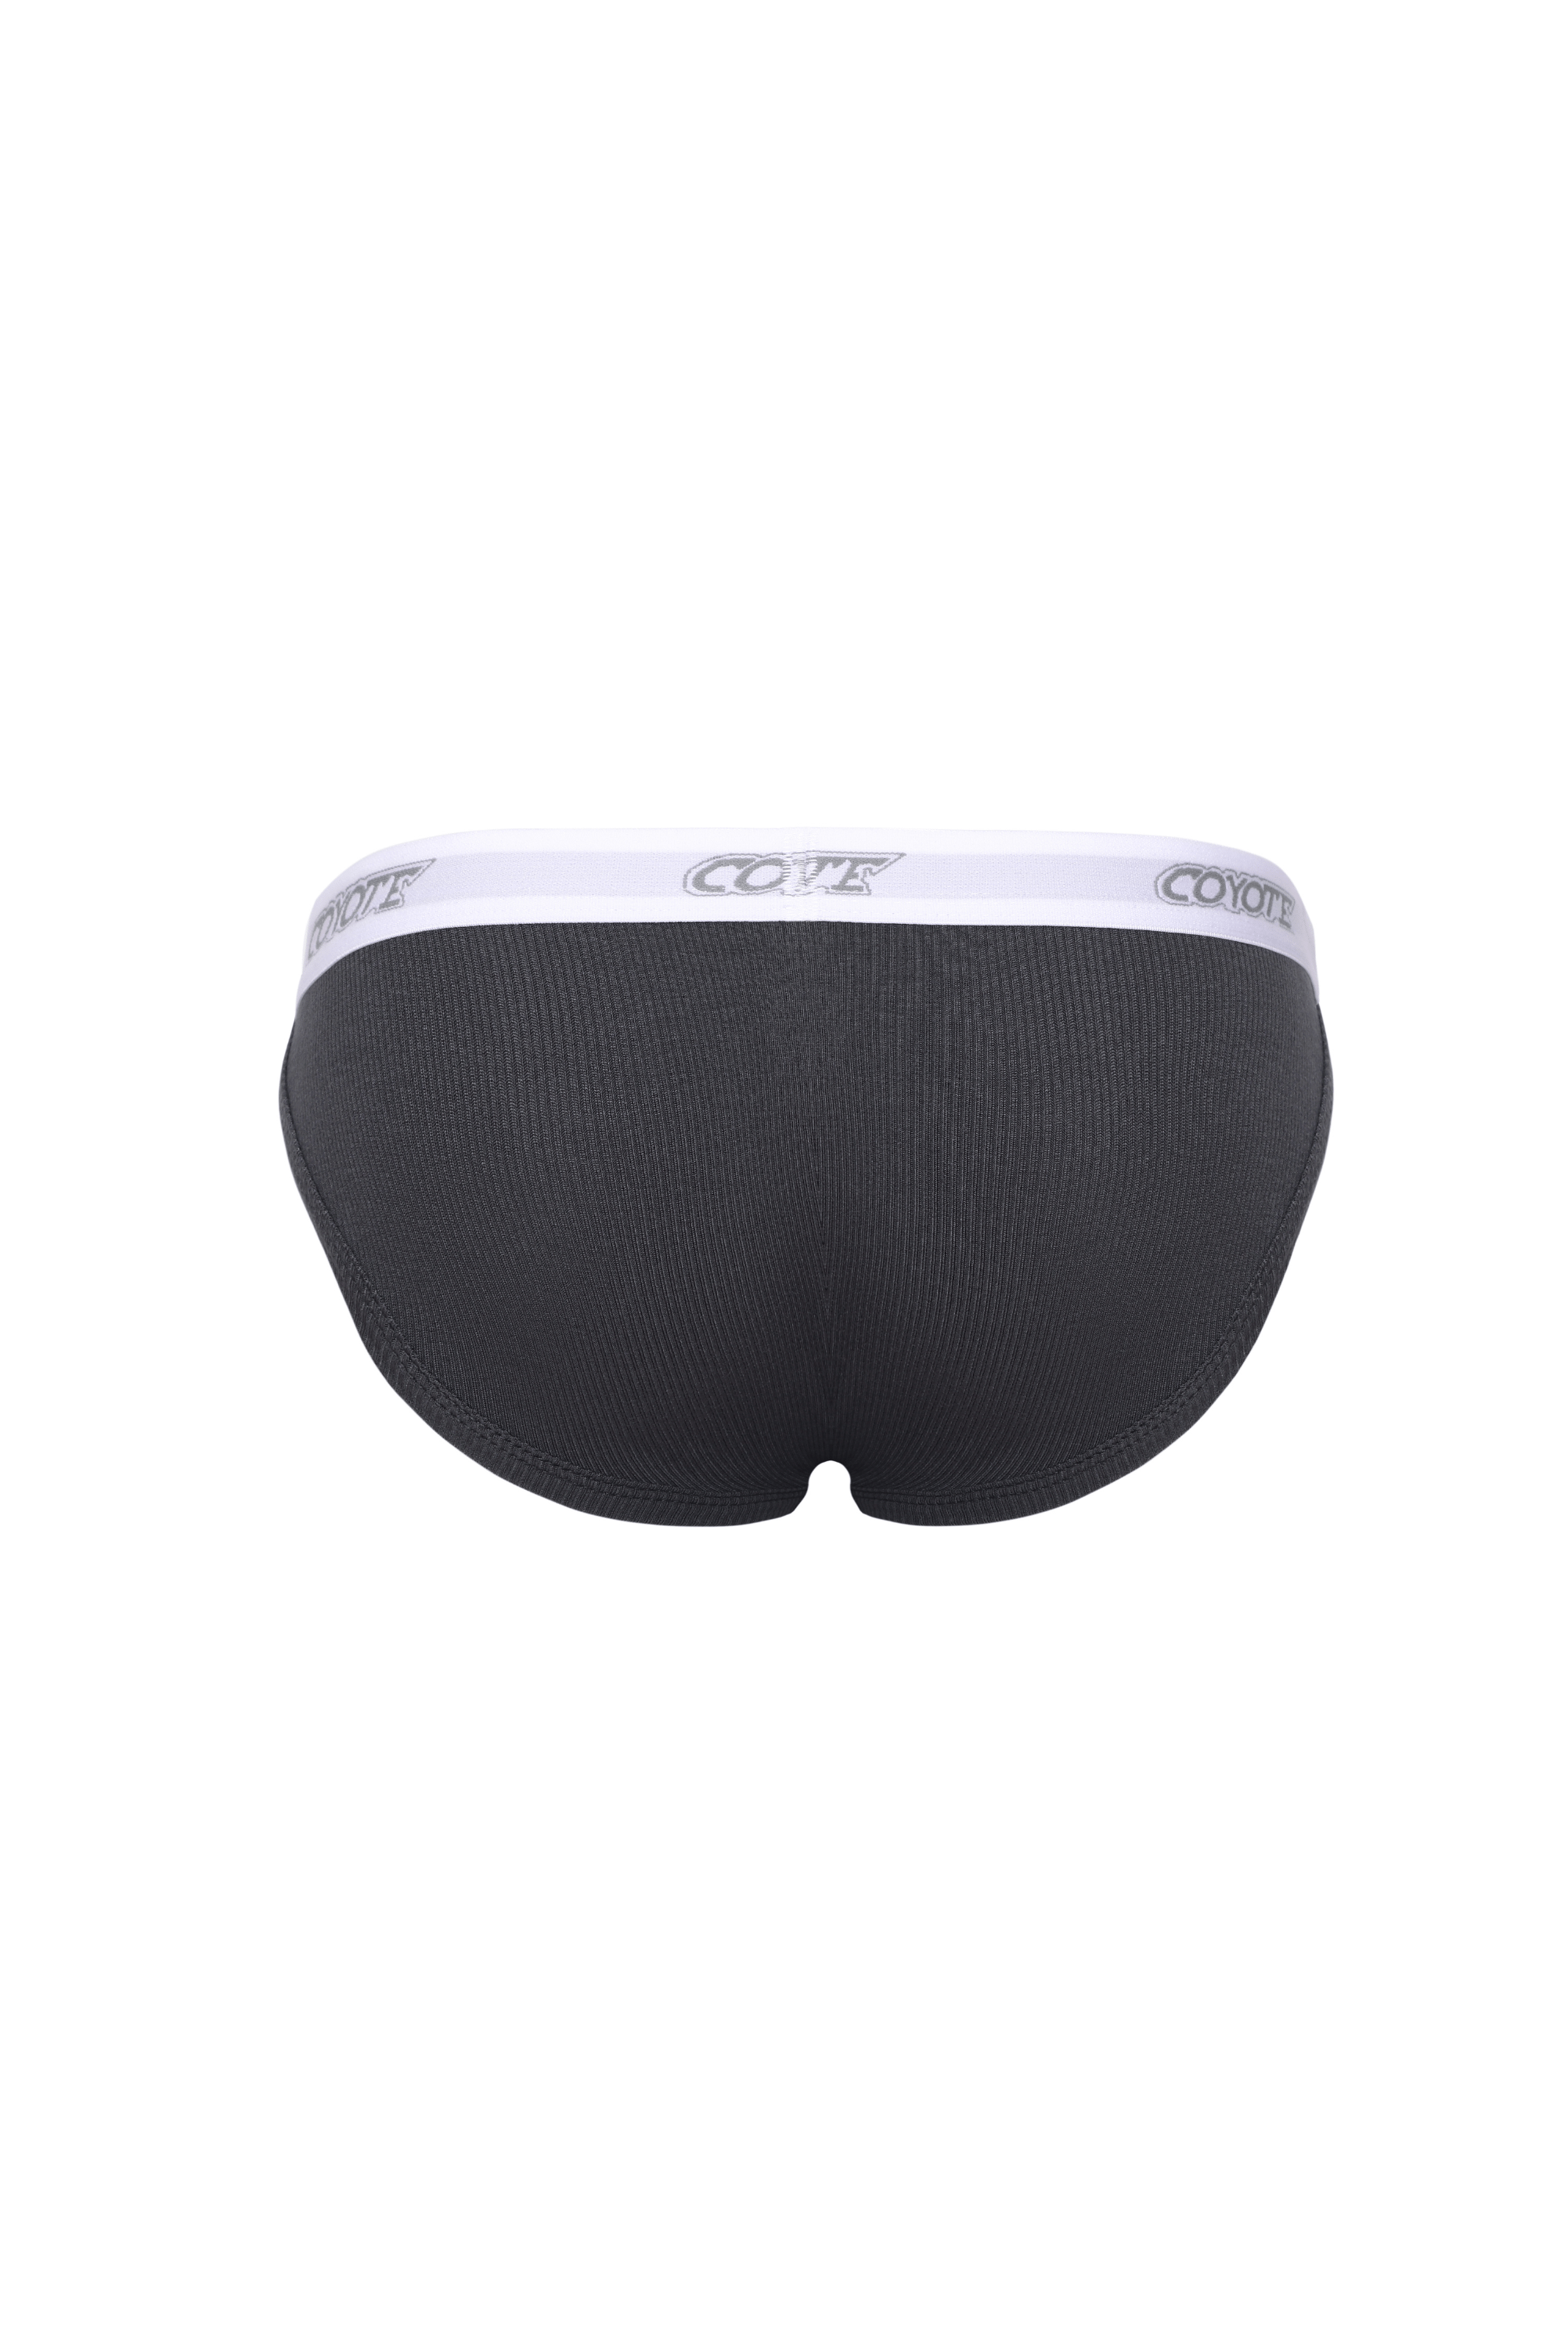 Cotton Rib Fly Front Brief | Charcoal - Coyote Jocks 